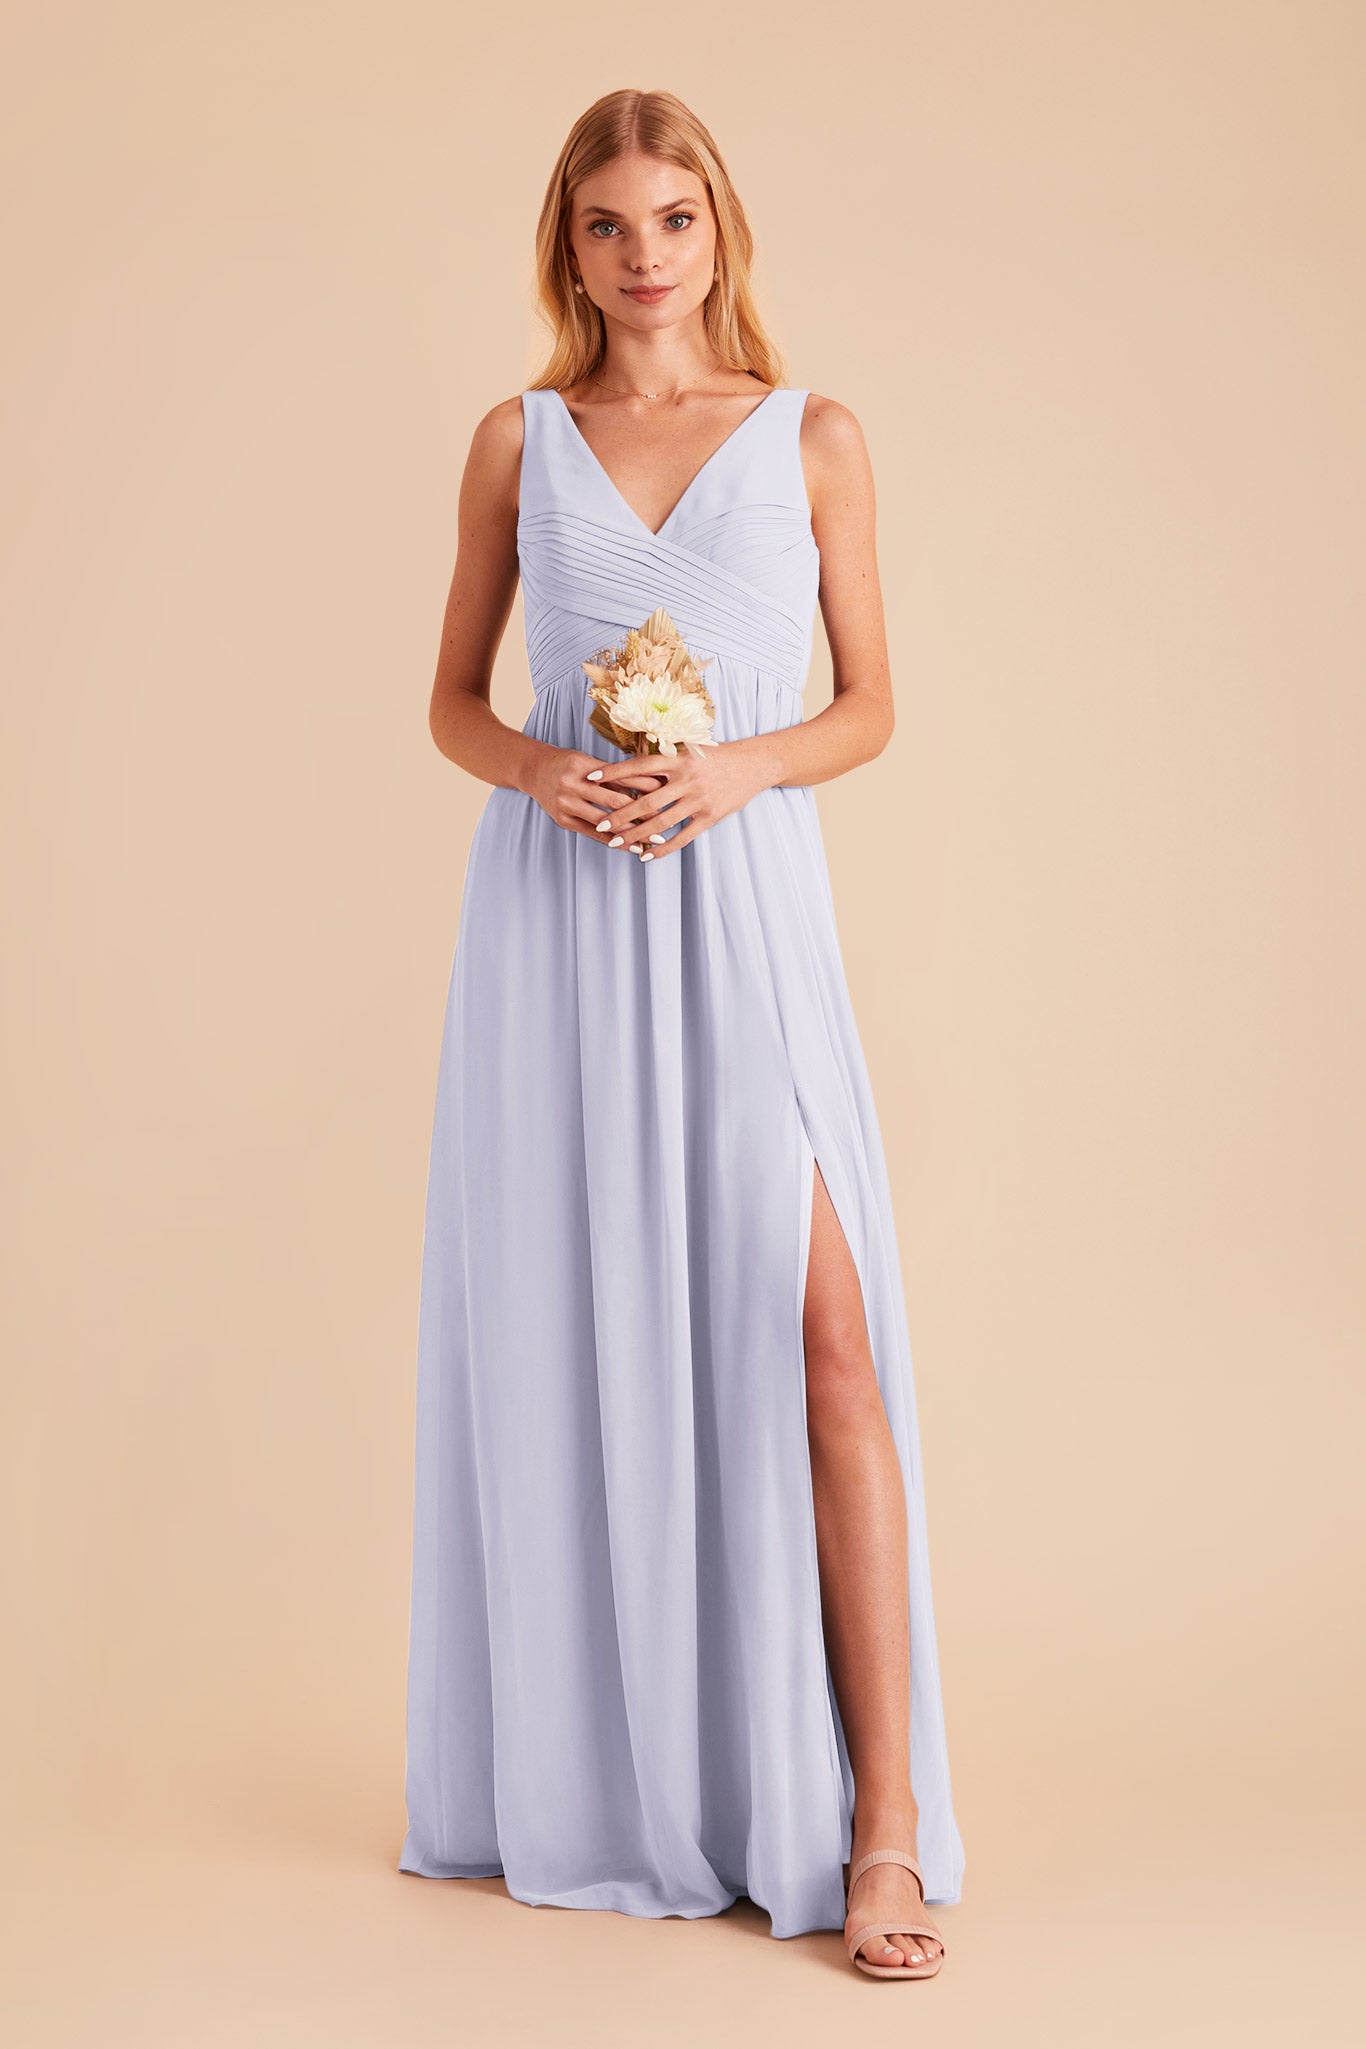 Laurie Periwinkle Blue Empire Bridesmaid Dress | Birdy Grey